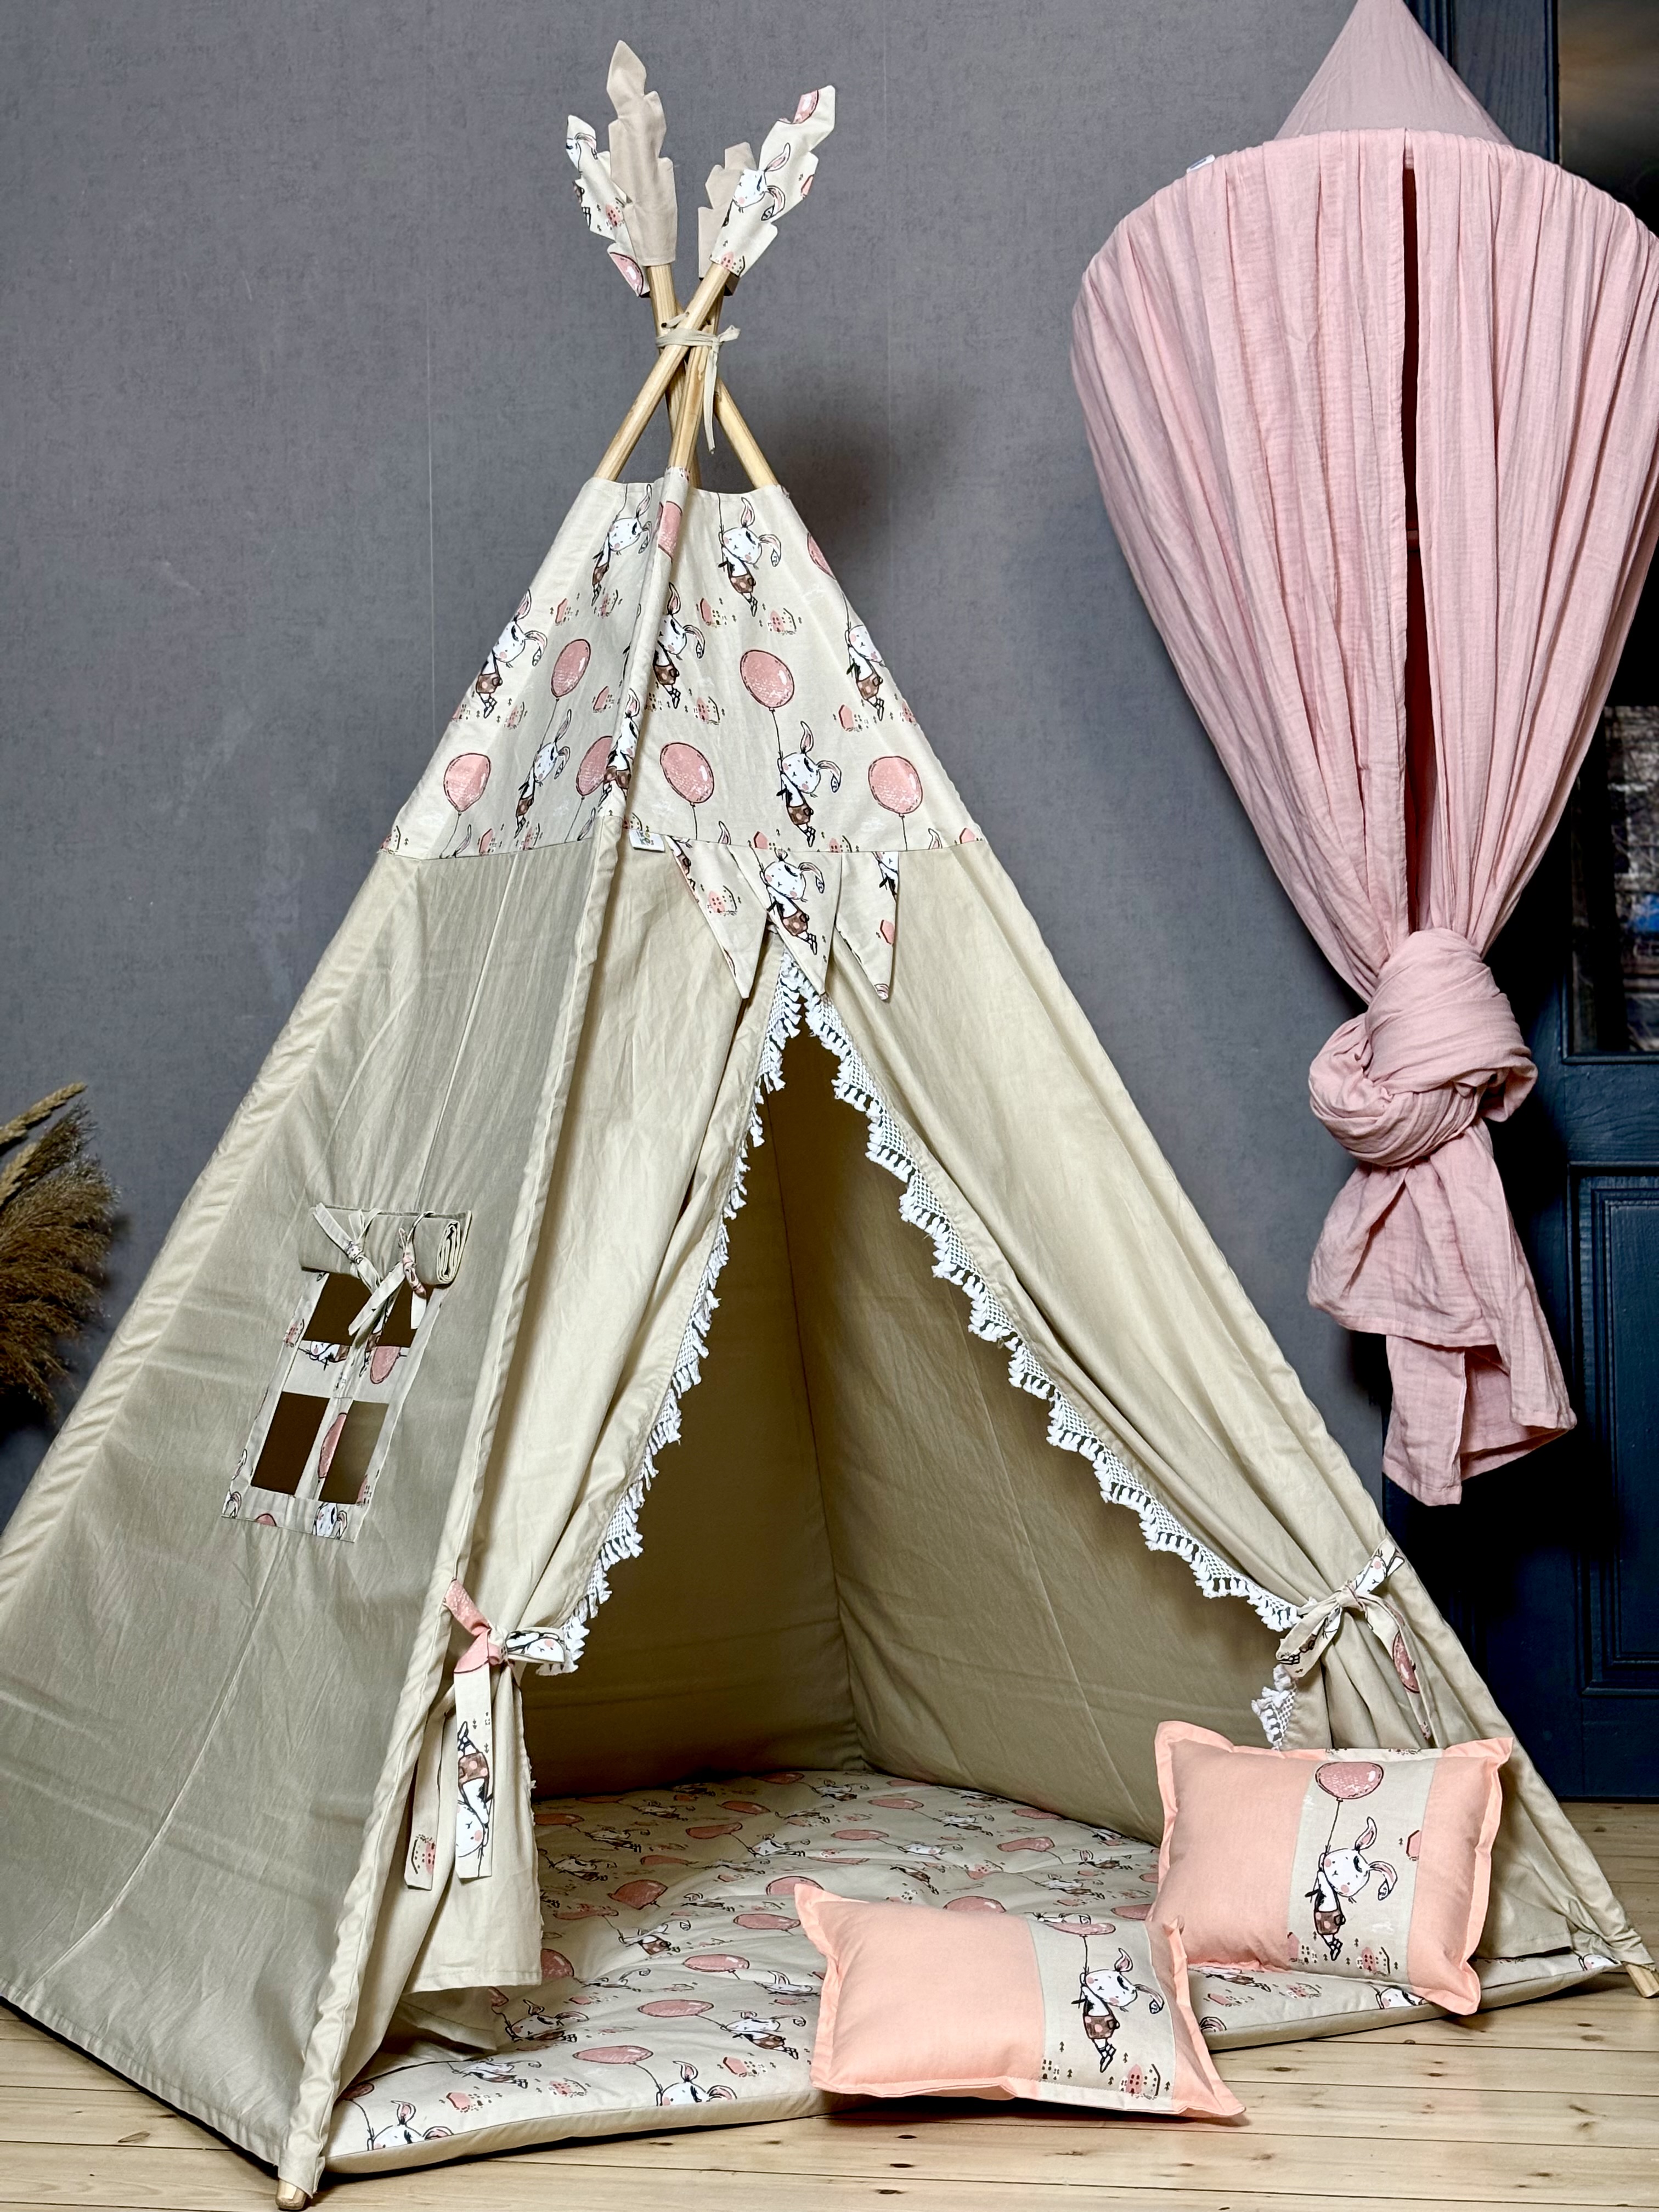 Children's tent beige, with lace and bunny print on the entrance